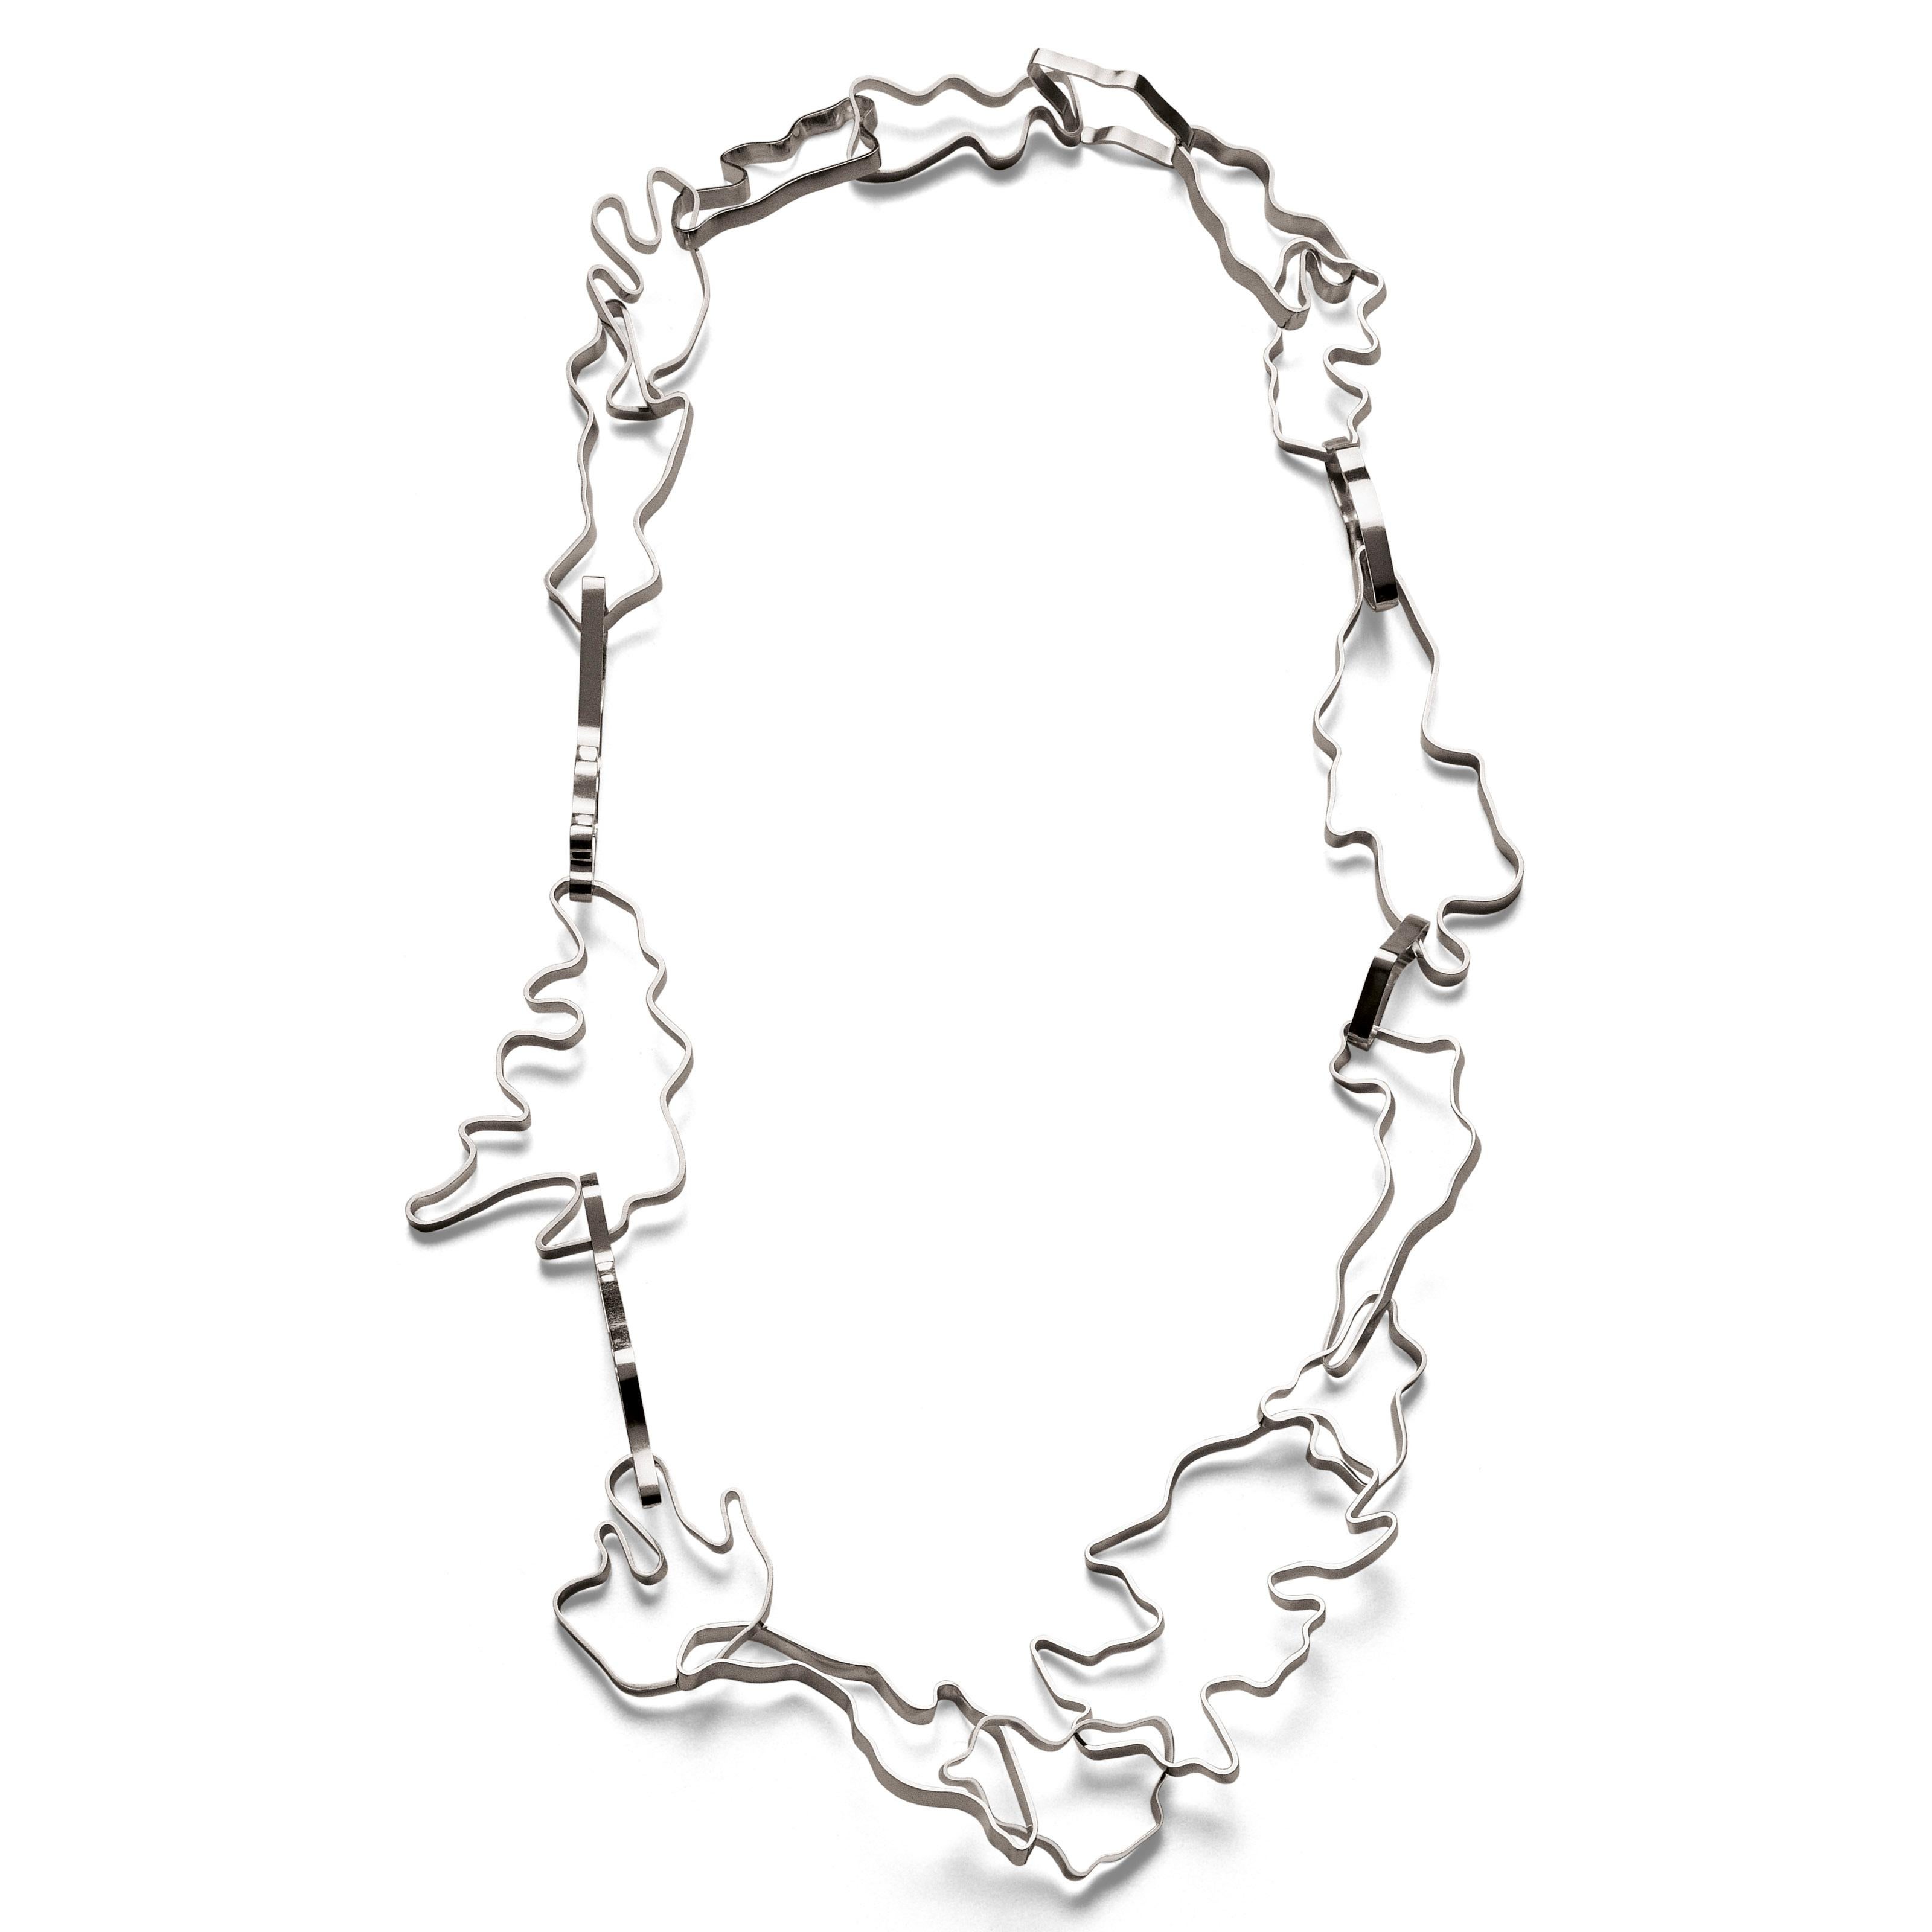 Nathalie Jean Contemporary Sterling Silver Limited Edition Link Chain Necklace For Sale 1